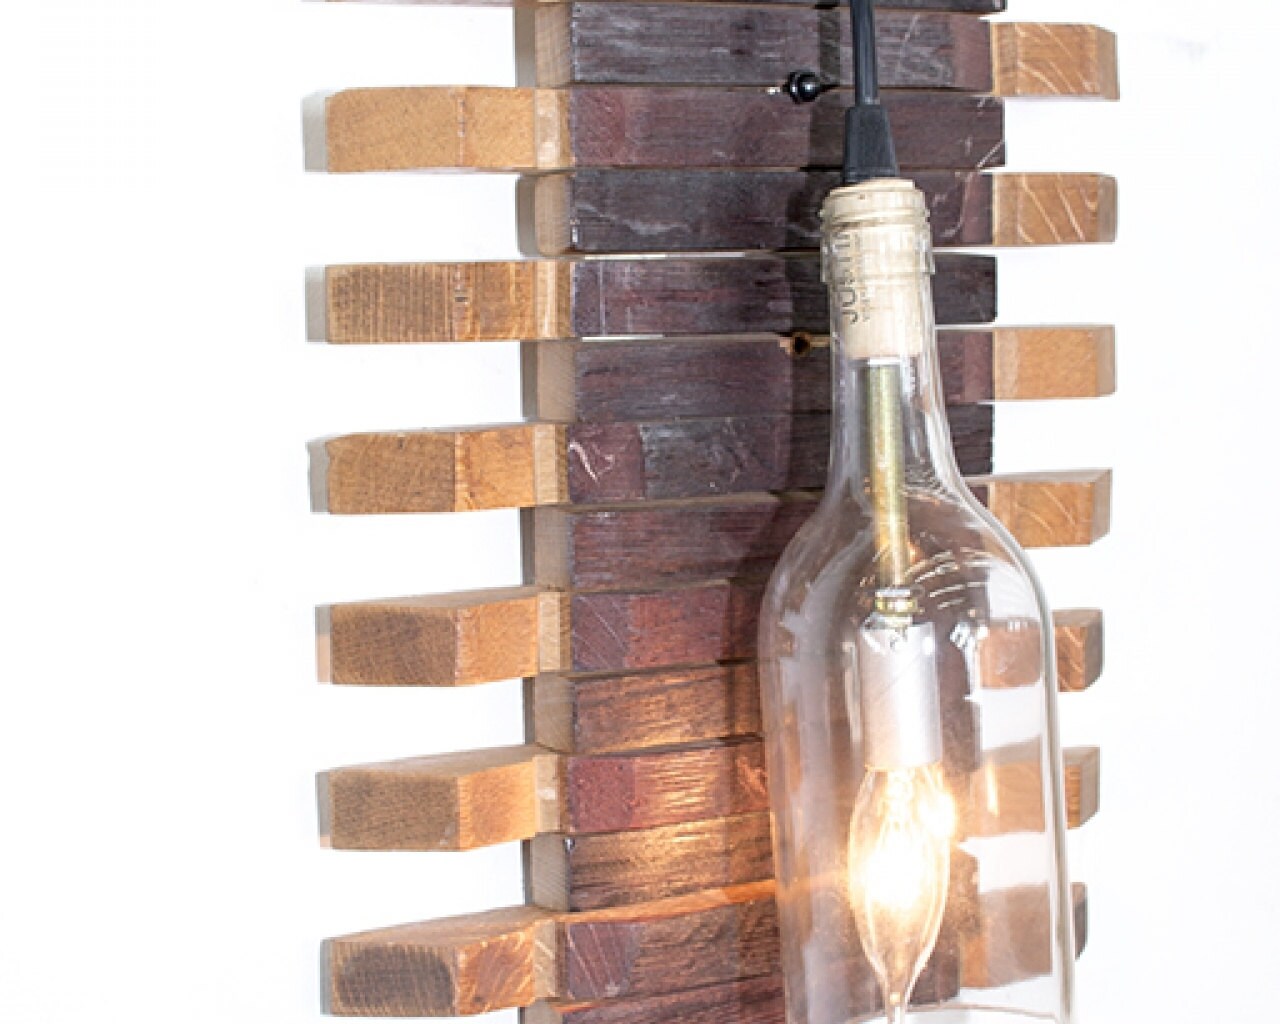 Wine Bottle and Barrel Wall Sconce - Santa Rosa - made from reclaimed Napa wine barrels and bottles. 100% Recycled!